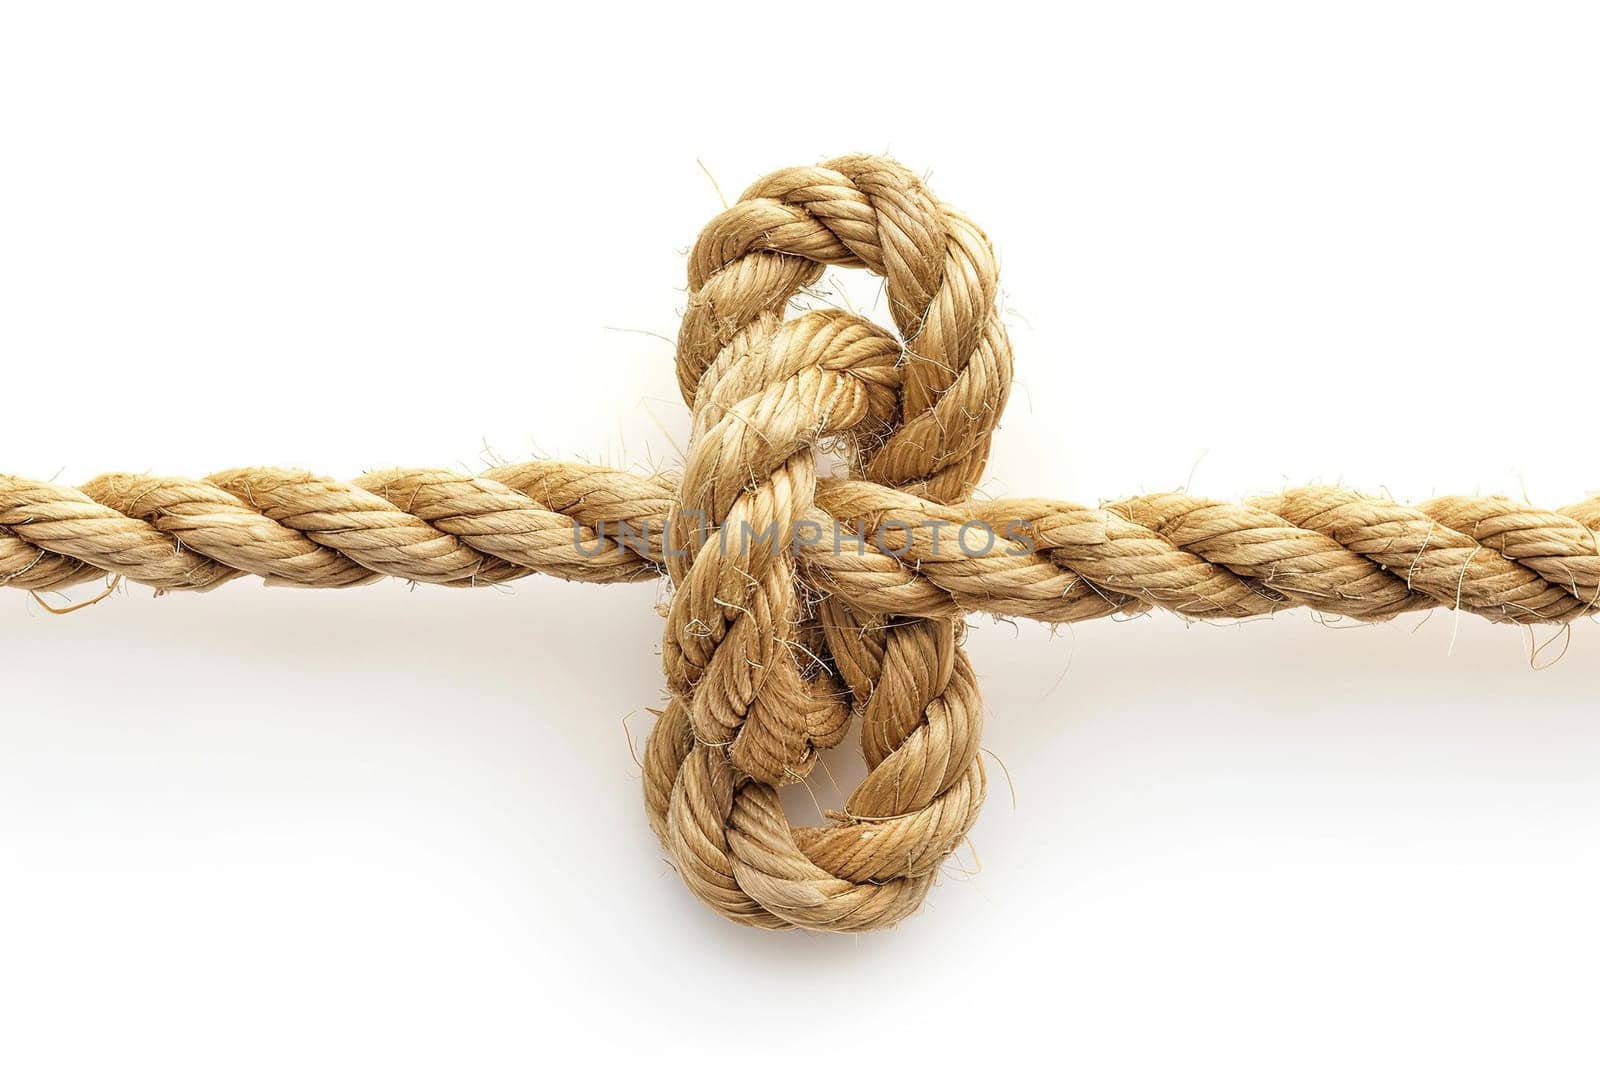 Rope with a tied knot on a white background.